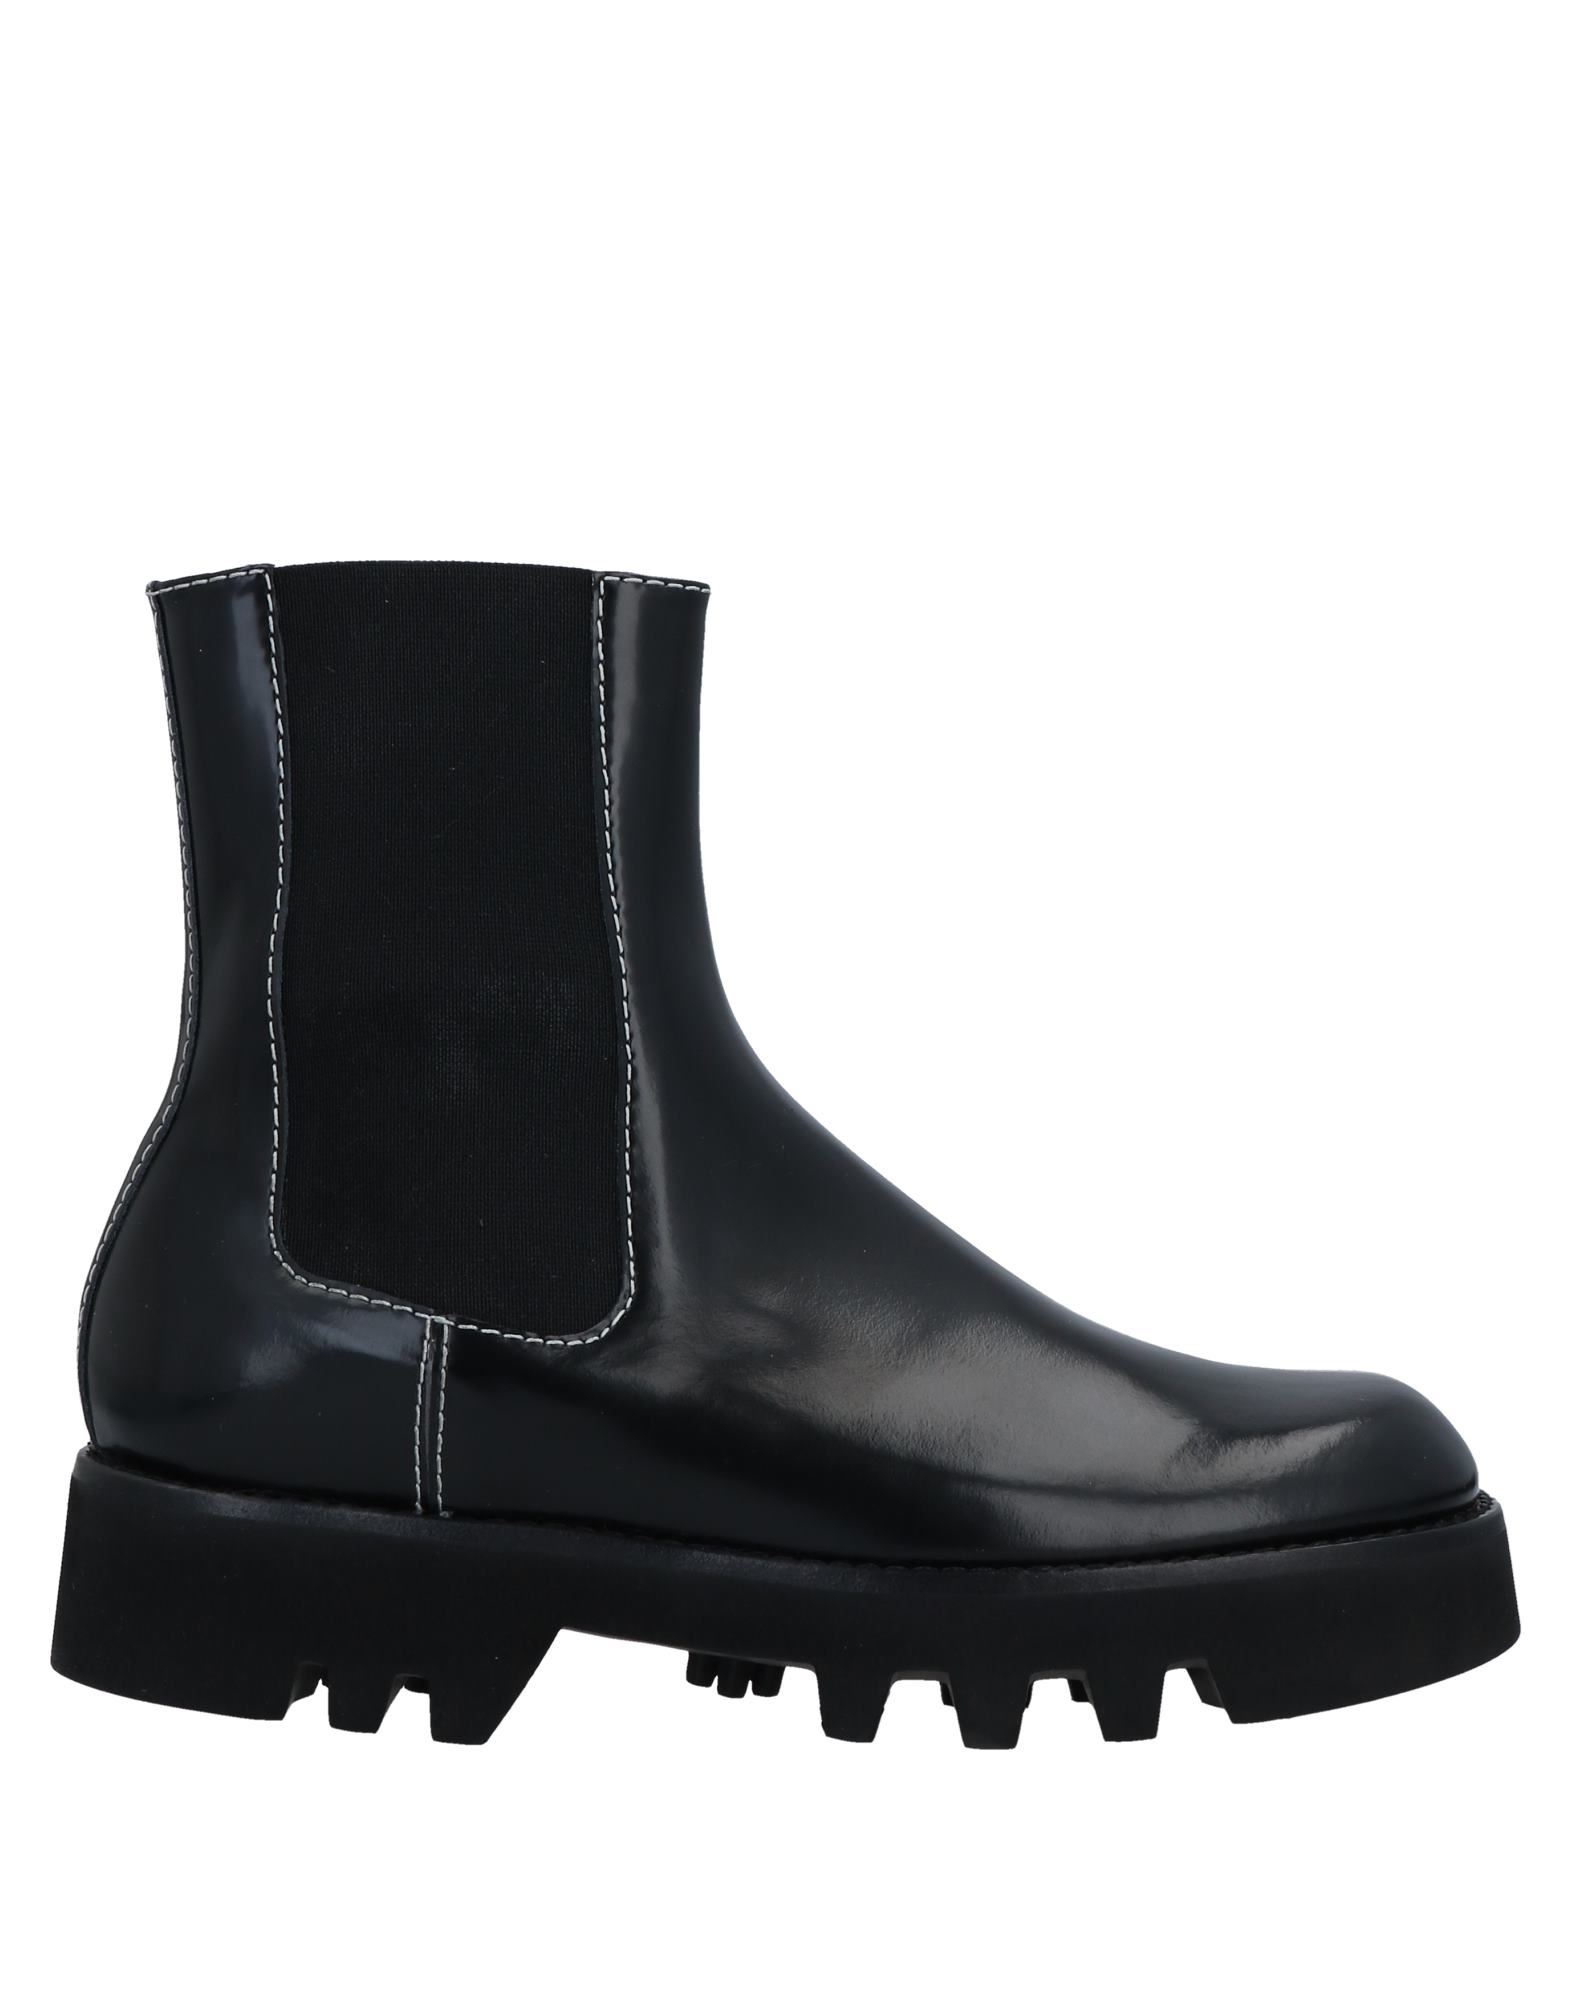 JW ANDERSON Ankle boots | Smart Closet